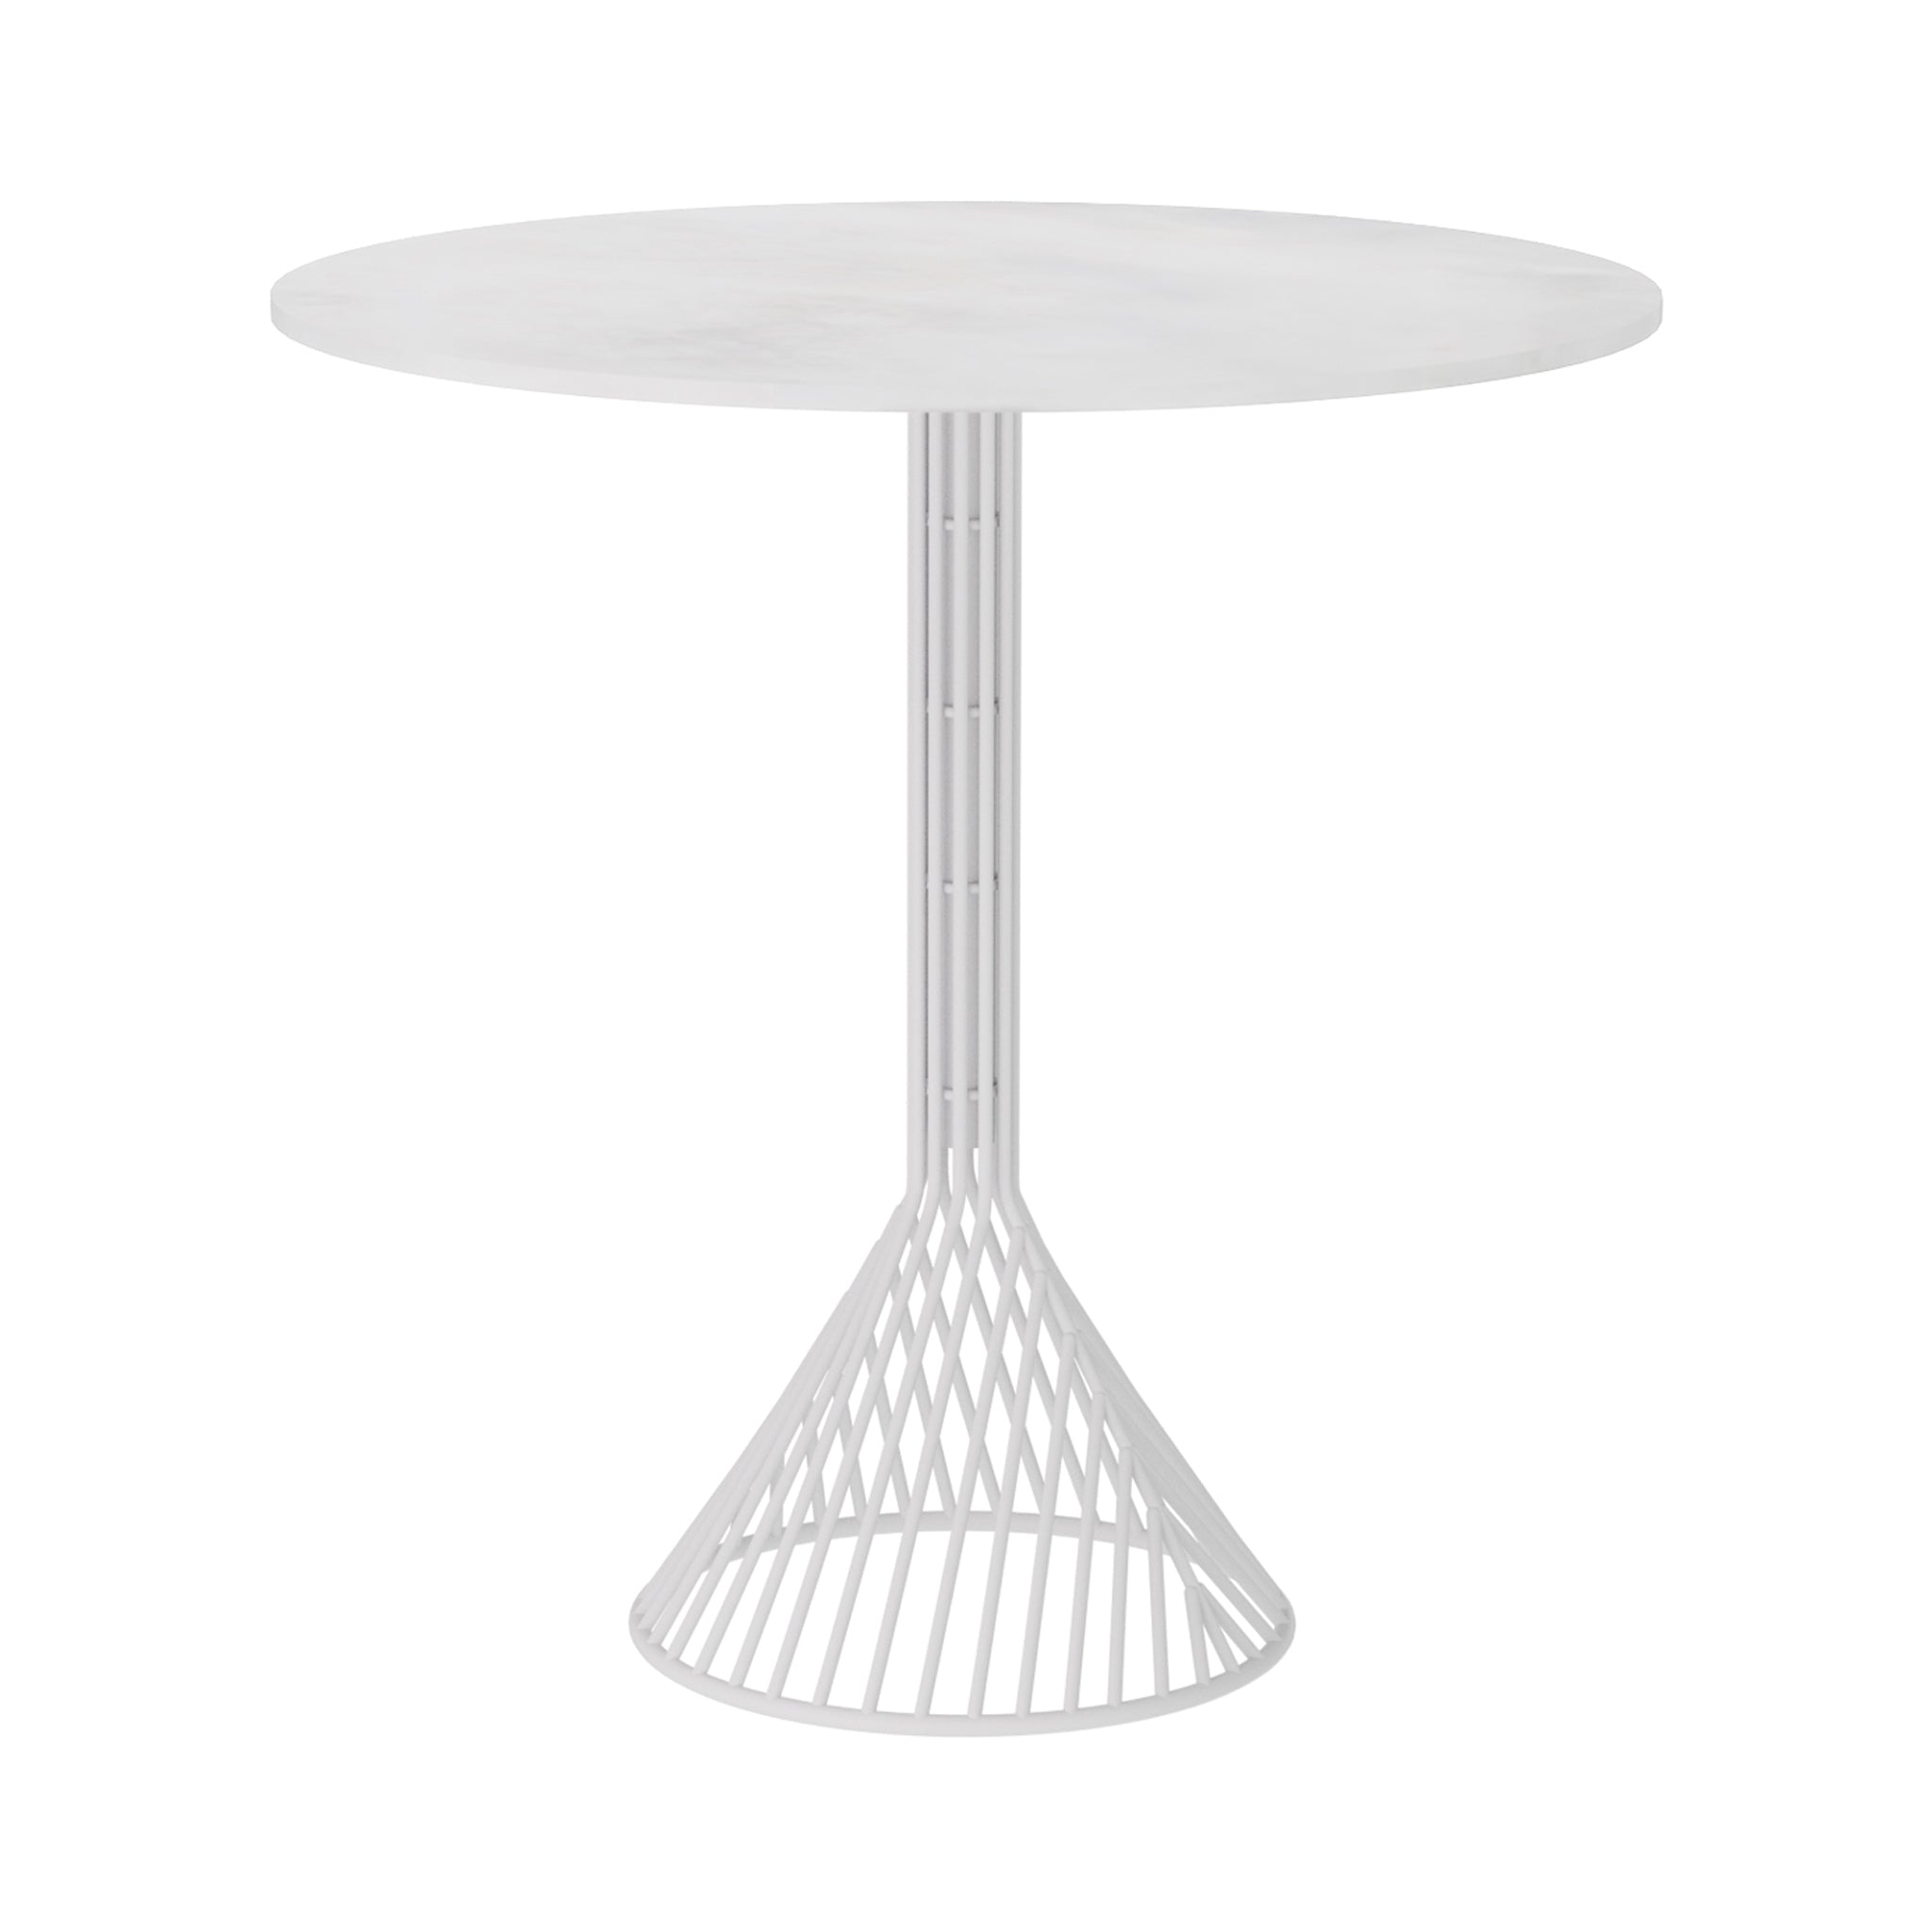 Bistro Cafe Table with Stone Top: White